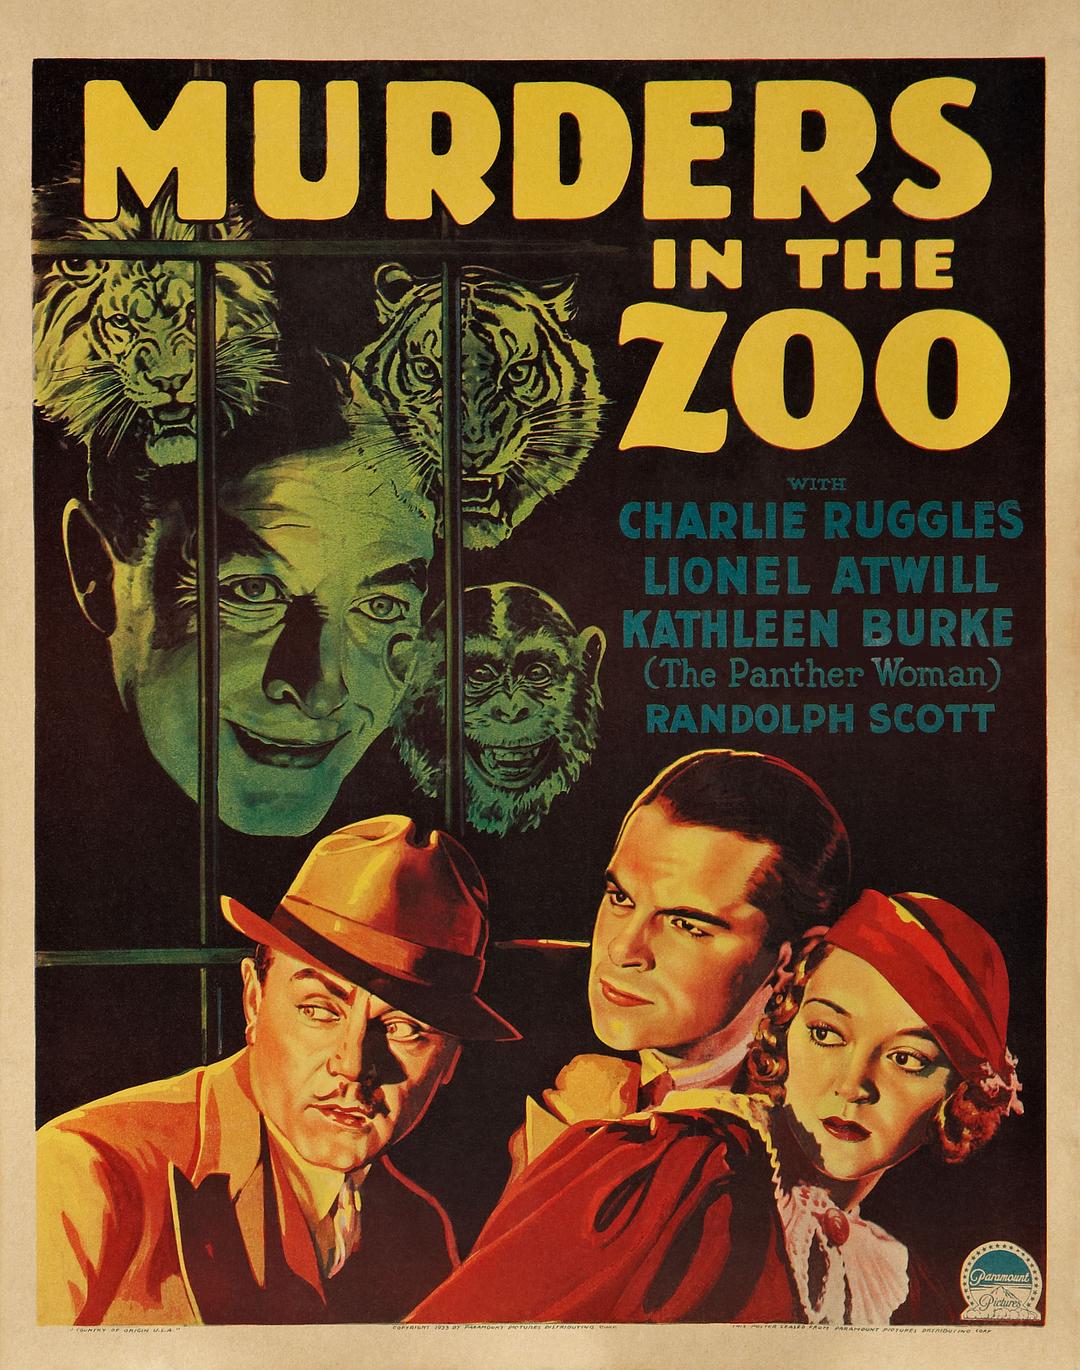 ԰ɱ Murders.in.the.Zoo.1933.1080p.BluRay.REMUX.AVC.DTS-HD.MA.2.0-FGT 16.01GB-1.png